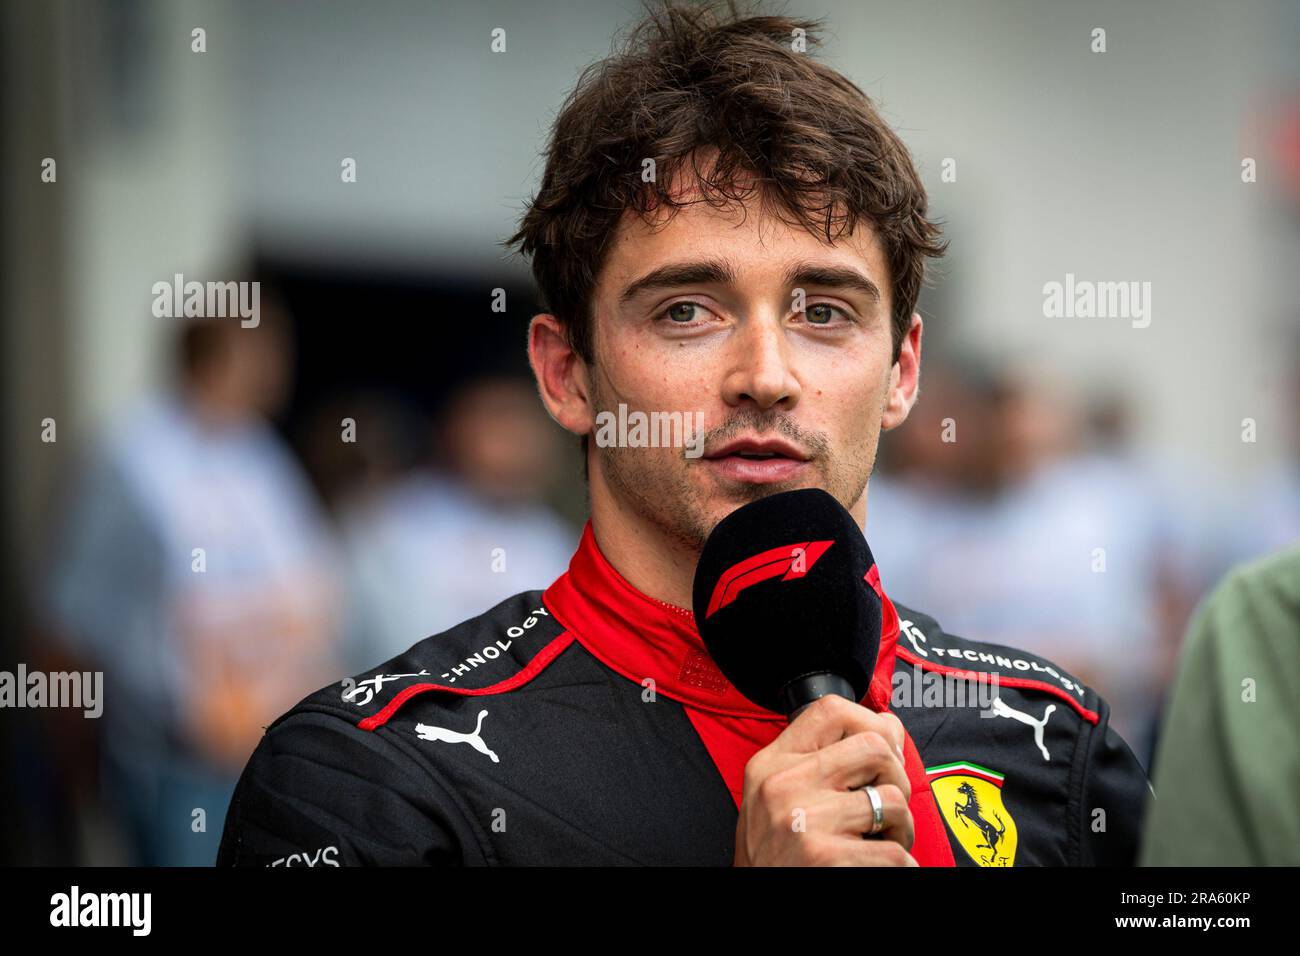 Spielberg, Austria. 30th June, 2023. Scuderia Ferrari's Monegasque driver Charles Leclerc seen after the qualifying session during the Austrian F1 Grand Prix at the Red Bull Ring. Due to the new sprint format Grand Prix weekend, drivers had only one free practice and qualifying session already on Friday afternoon. Red Bull Racing's Dutch driver Max Verstappen took the pole position for Sunday's Grand Prix race, followed by Ferrari's Monegasque driver Charles Leclerc and Spanish driver Carlos Sainz. Credit: SOPA Images Limited/Alamy Live News Stock Photo